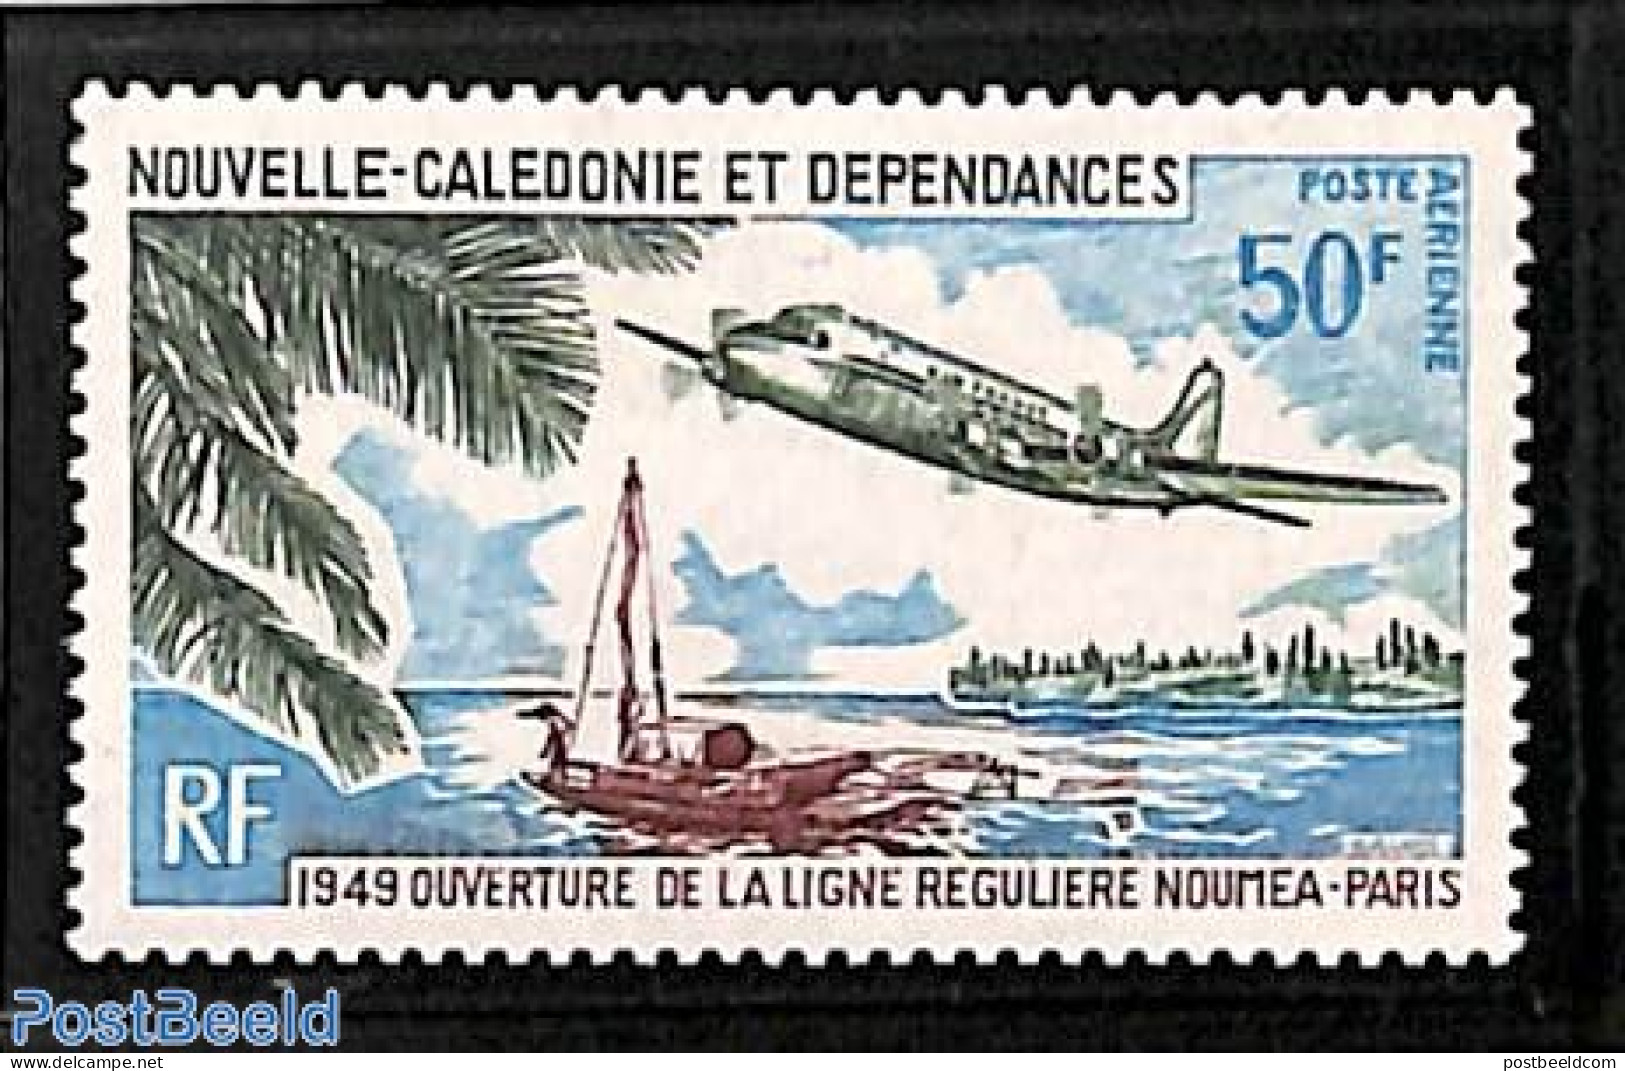 New Caledonia 1969 Paris Connection 1v, Mint NH, Transport - Aircraft & Aviation - Ships And Boats - Unused Stamps